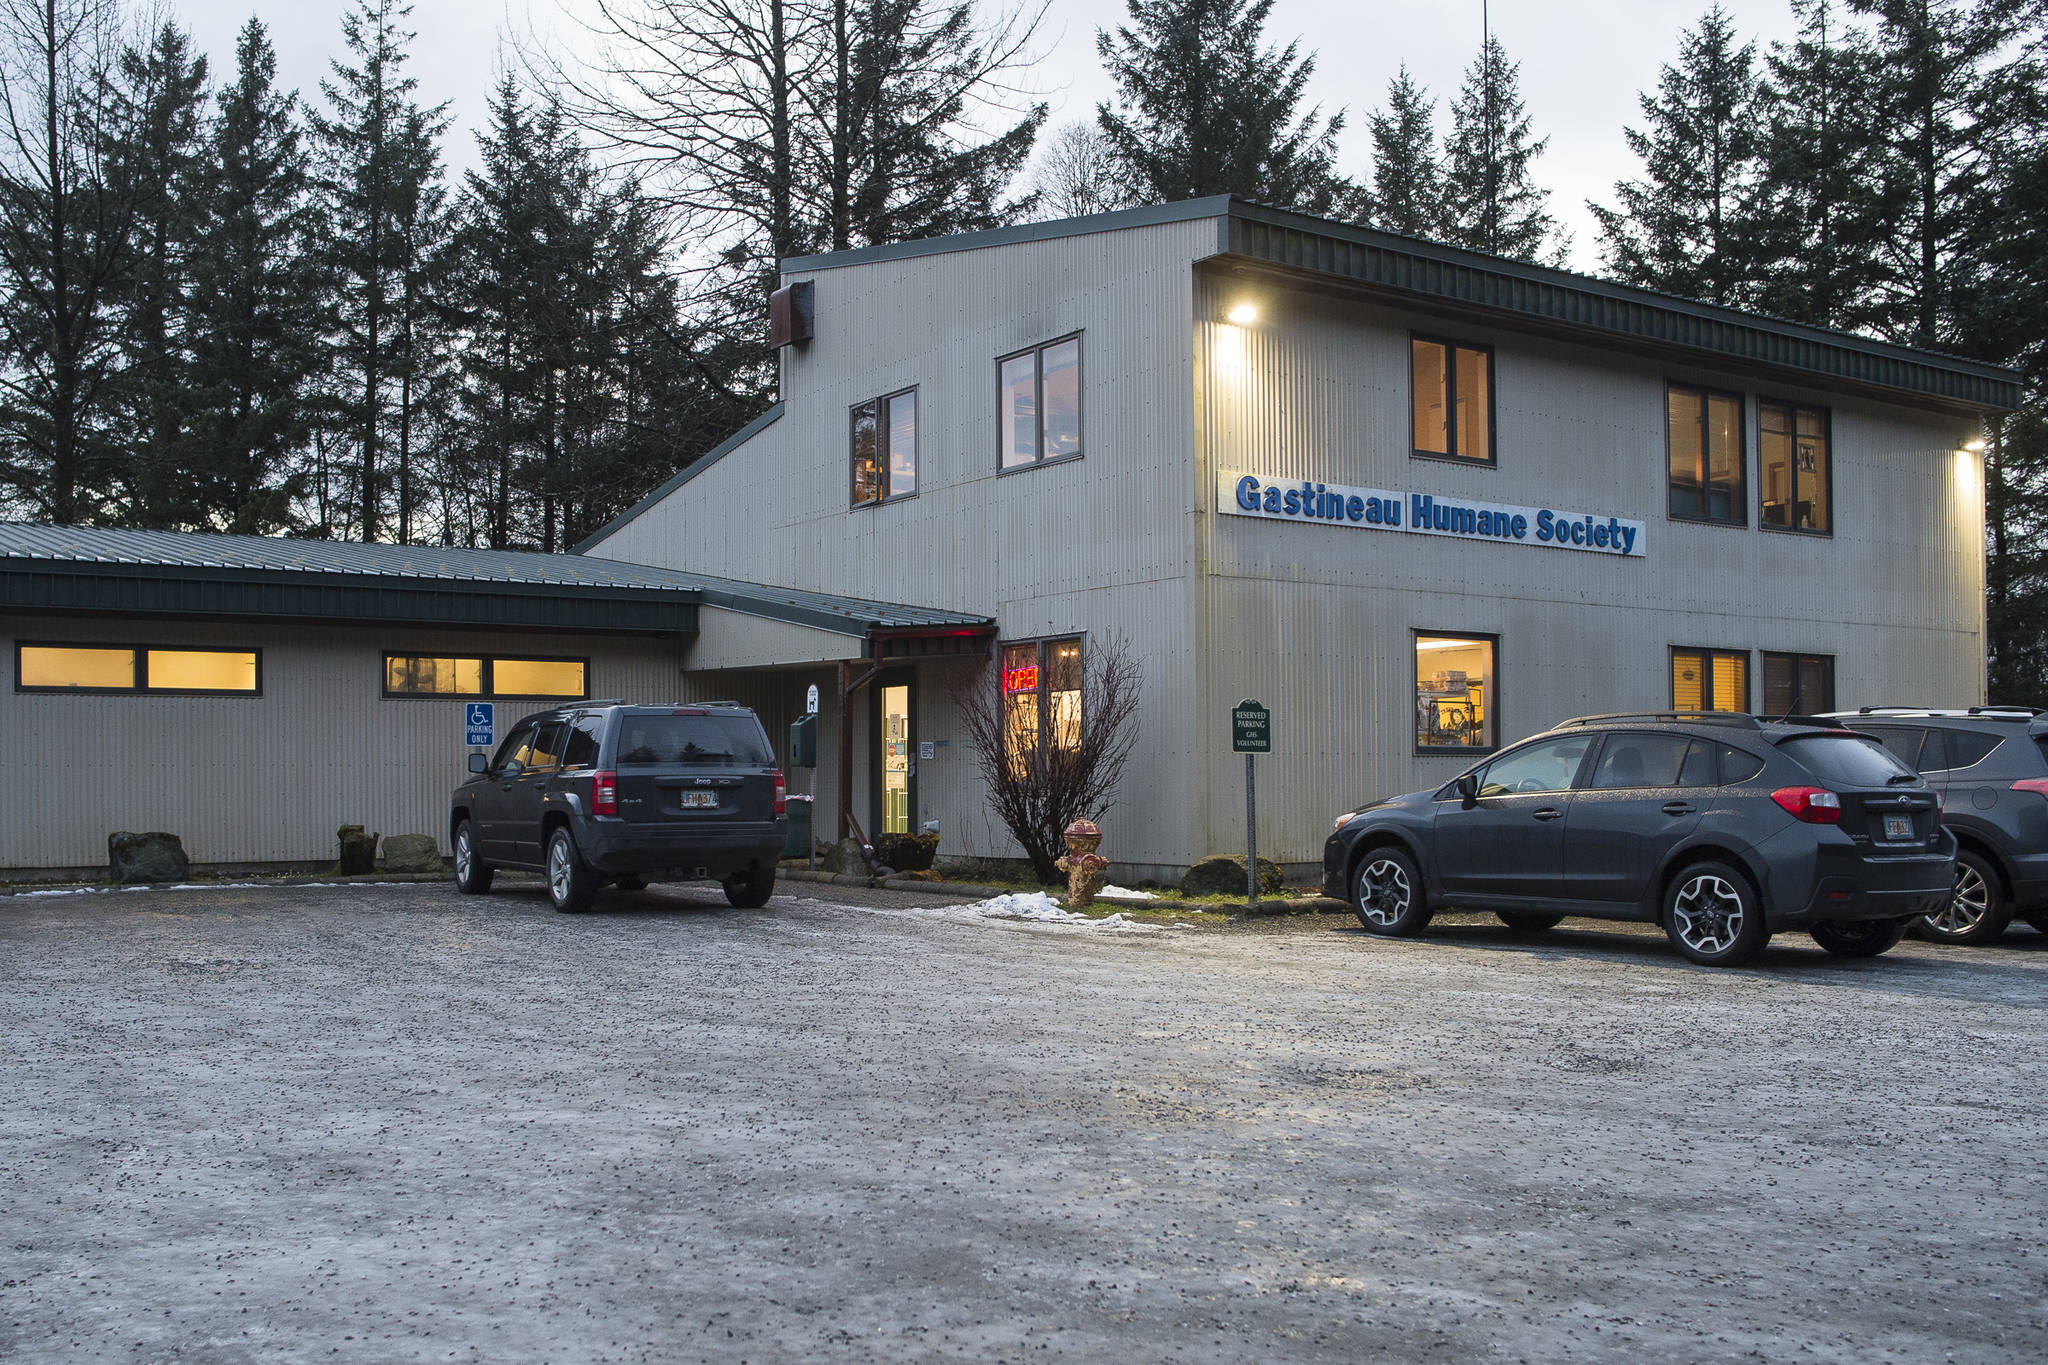 The Gastineau Humane Society is starting the new year with a name change to Juneau Animal Rescue. (Michael Penn | Juneau Empire)